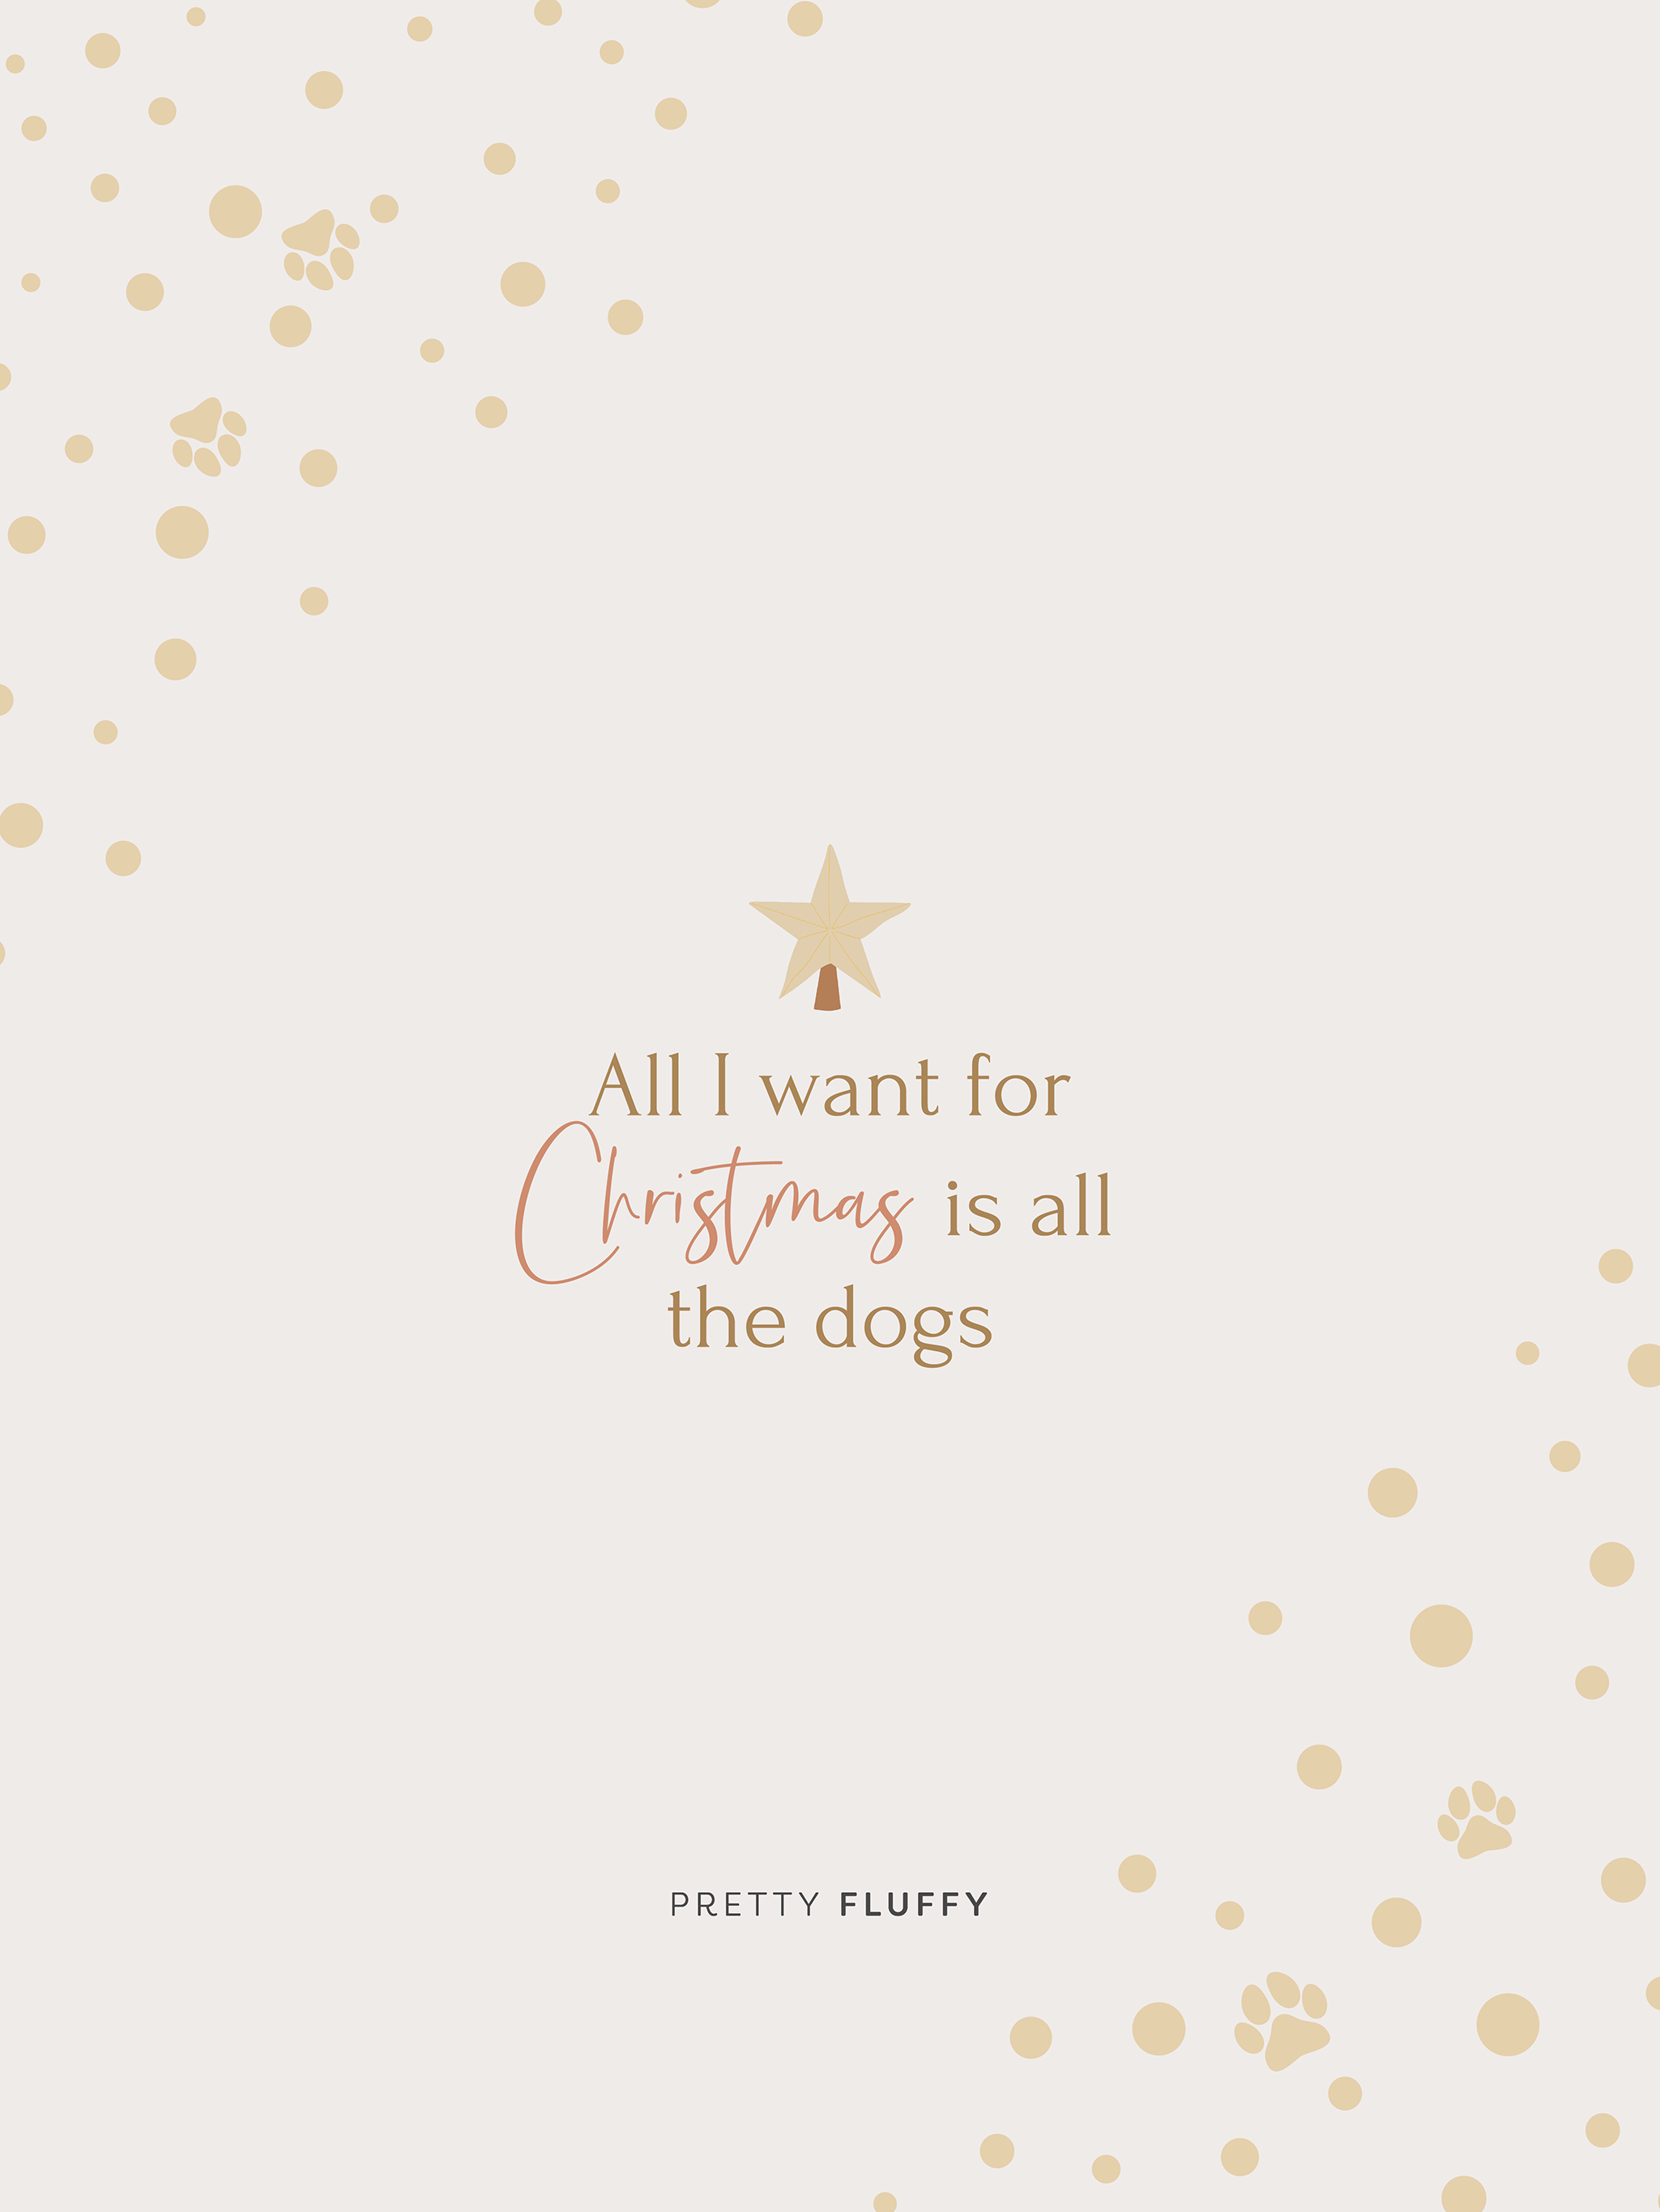 All I Want for Christmas is All the Dogs Free Desktop Wallpaper